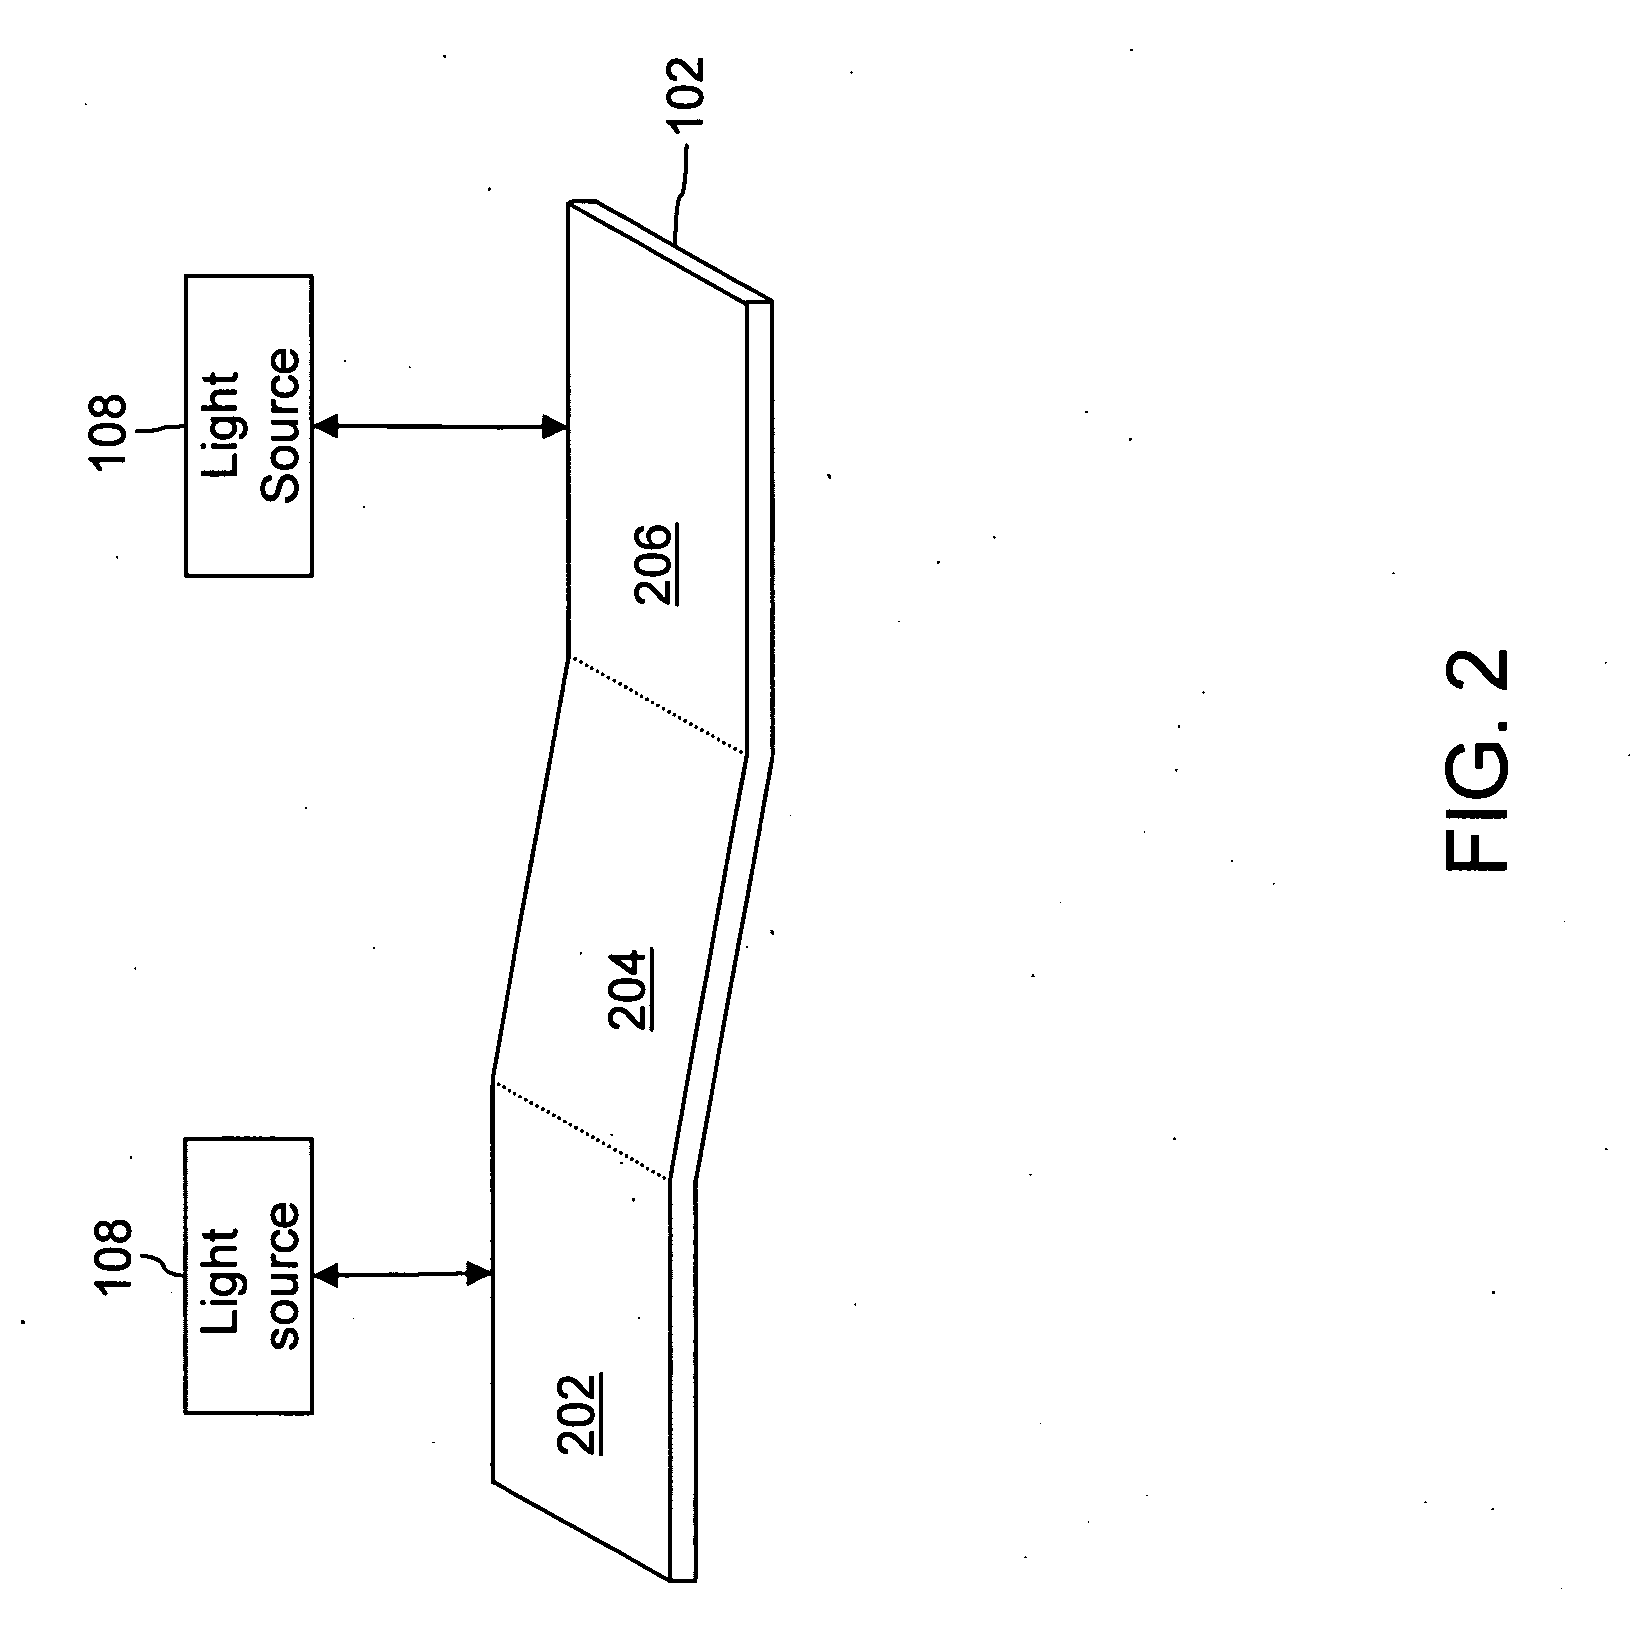 Method and system for topography-aware reticle enhancement